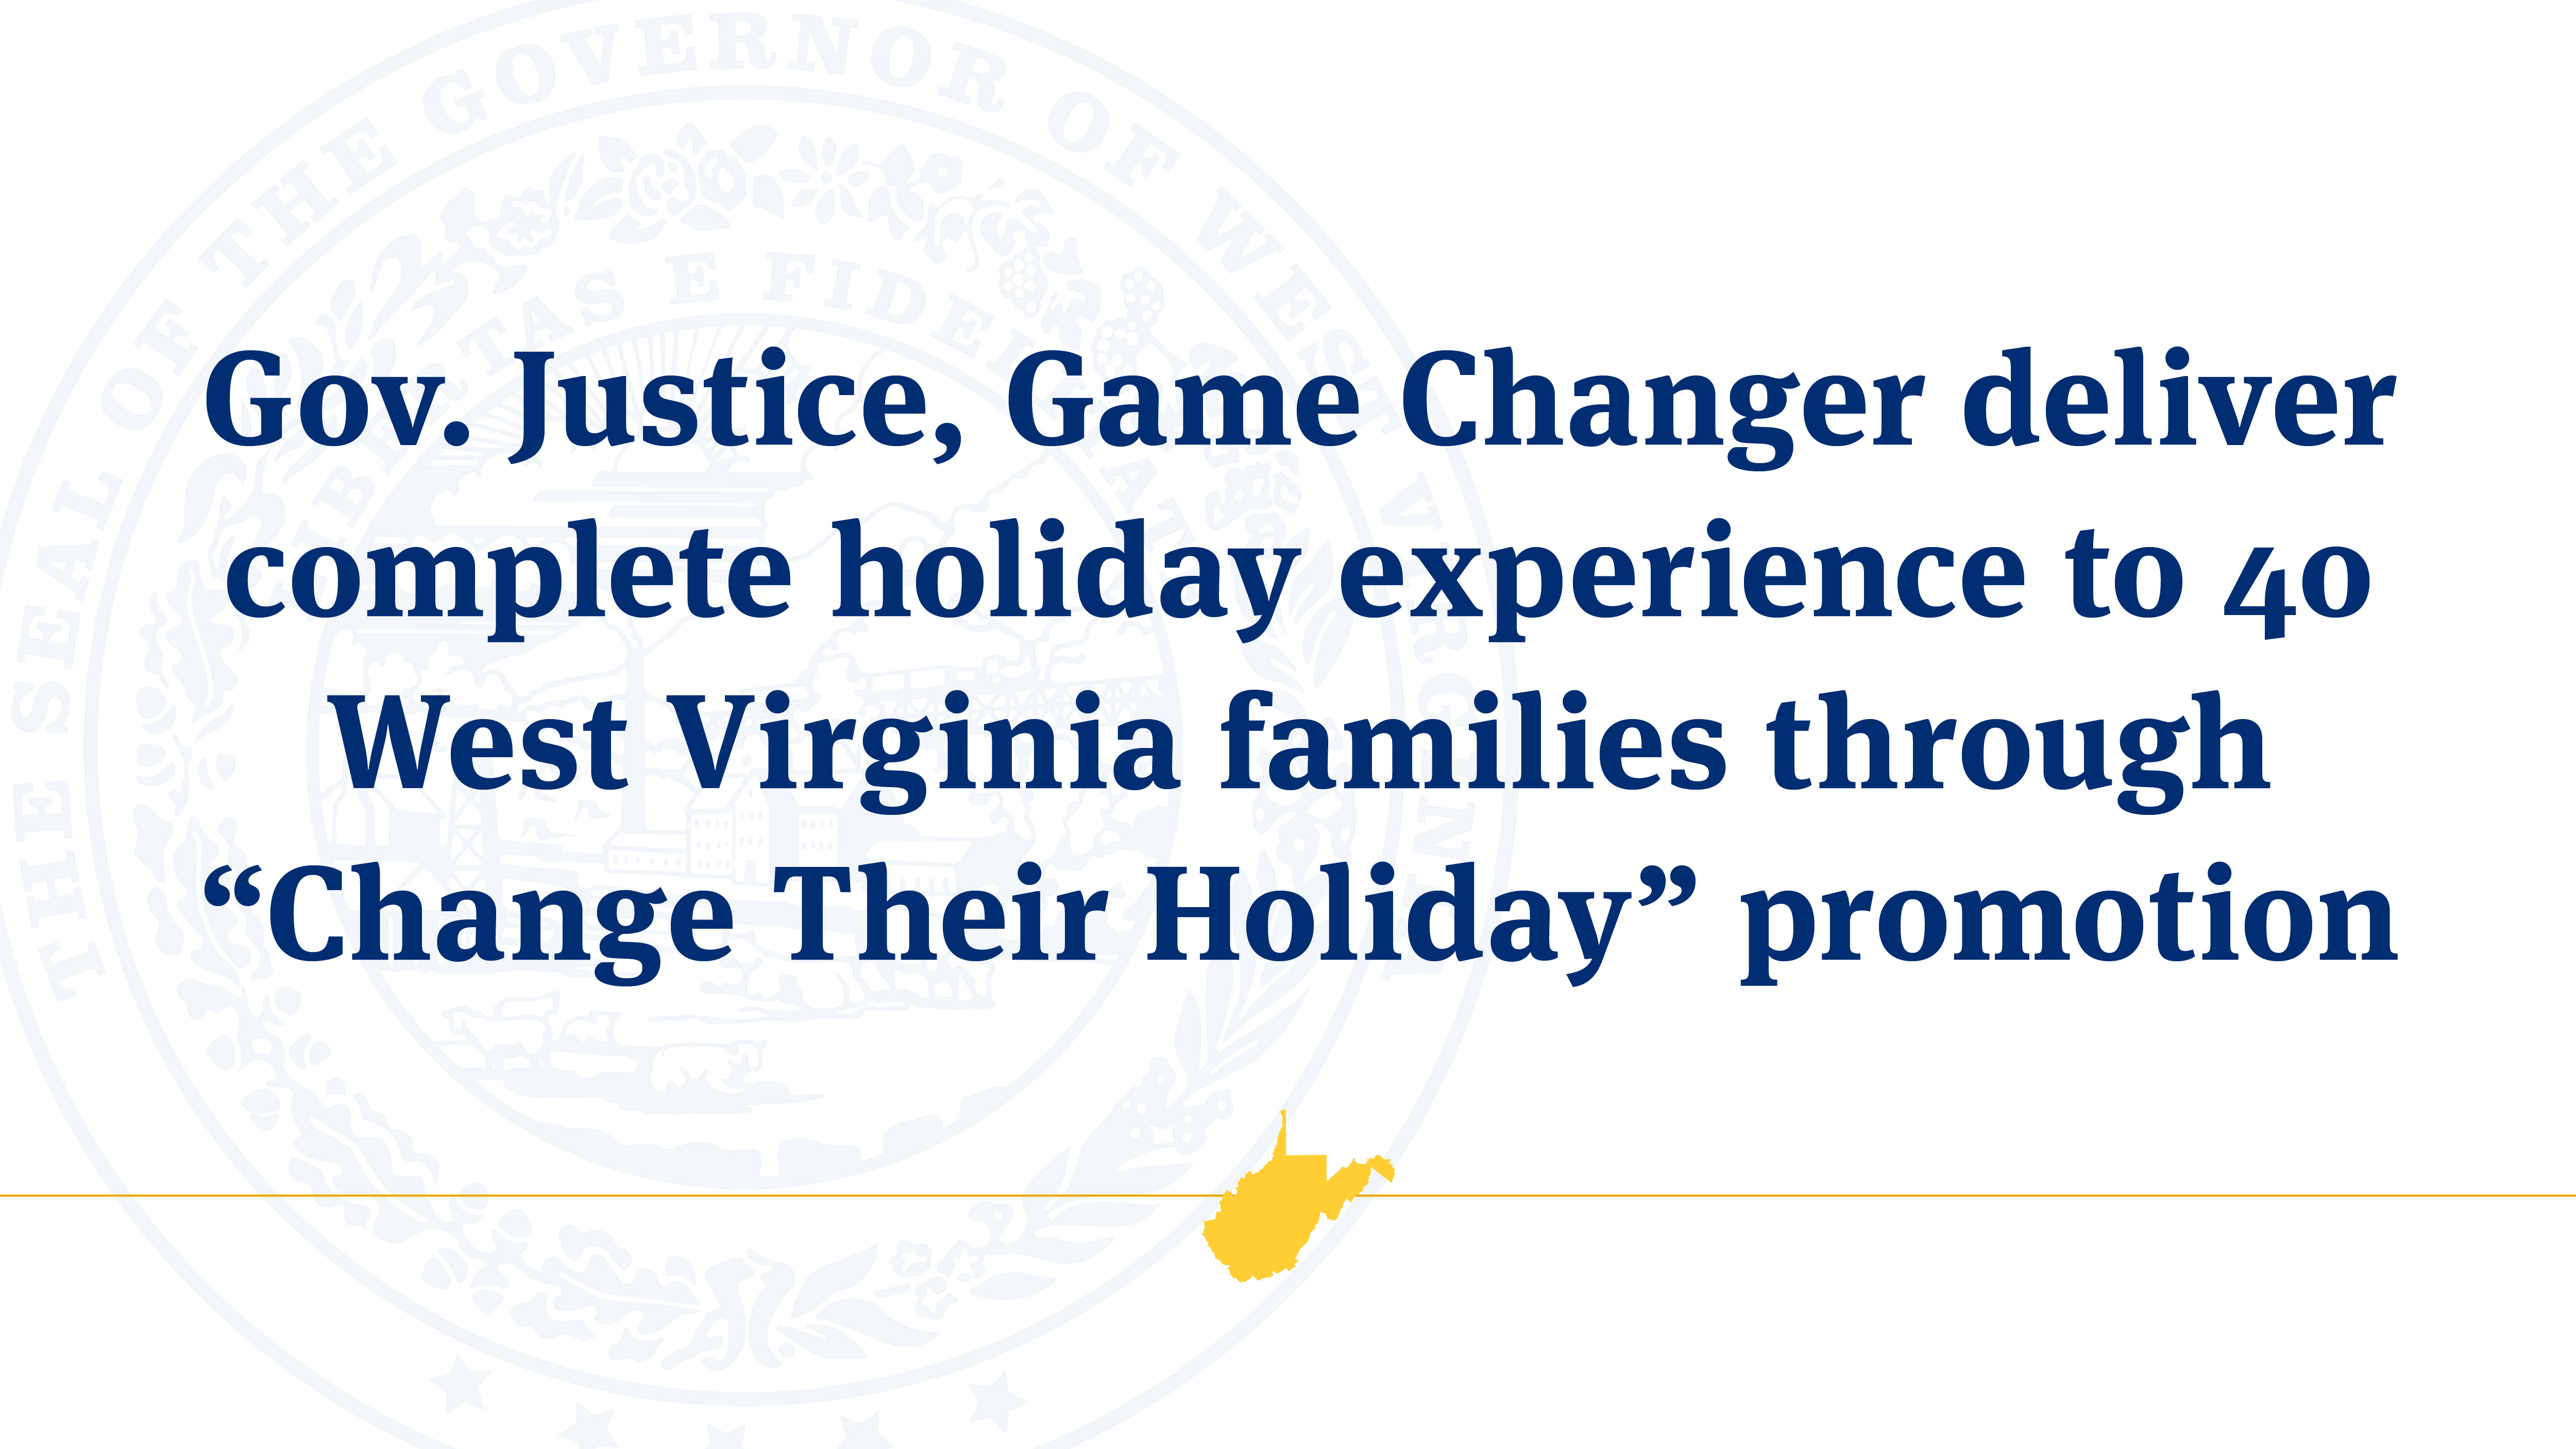 Gov. Justice, Game Changer deliver complete holiday experience to 40